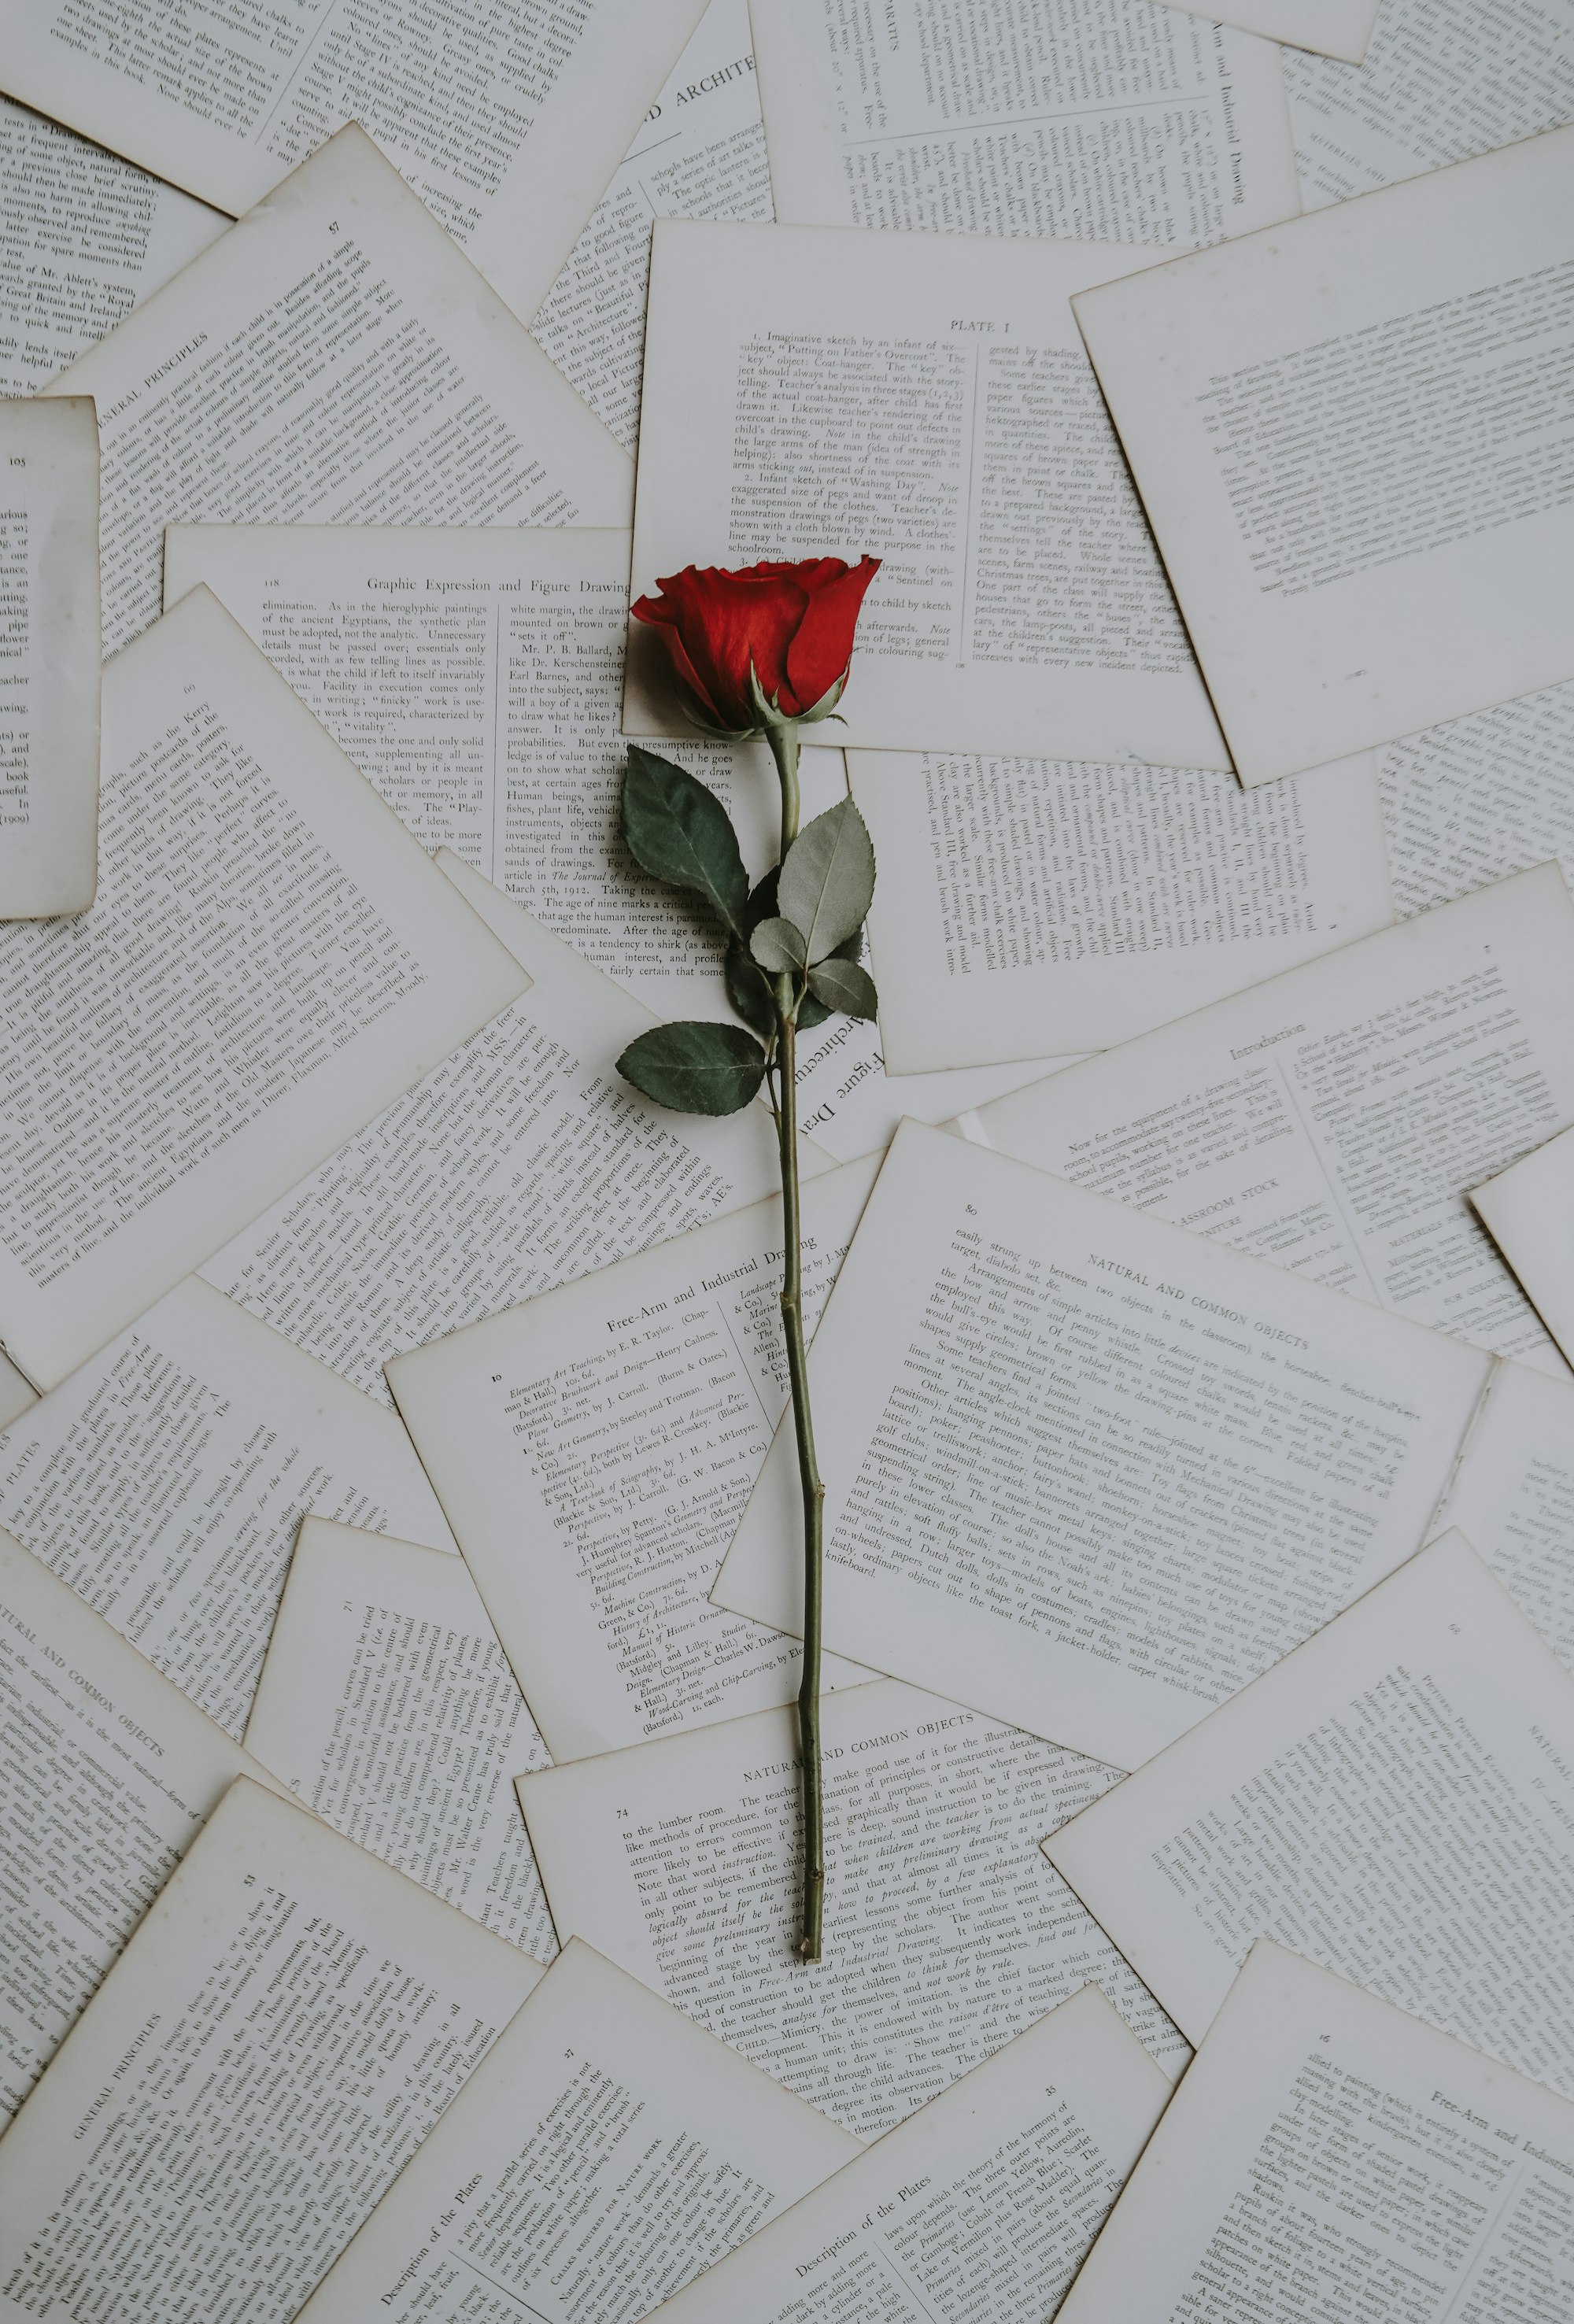 Single red rose on pages